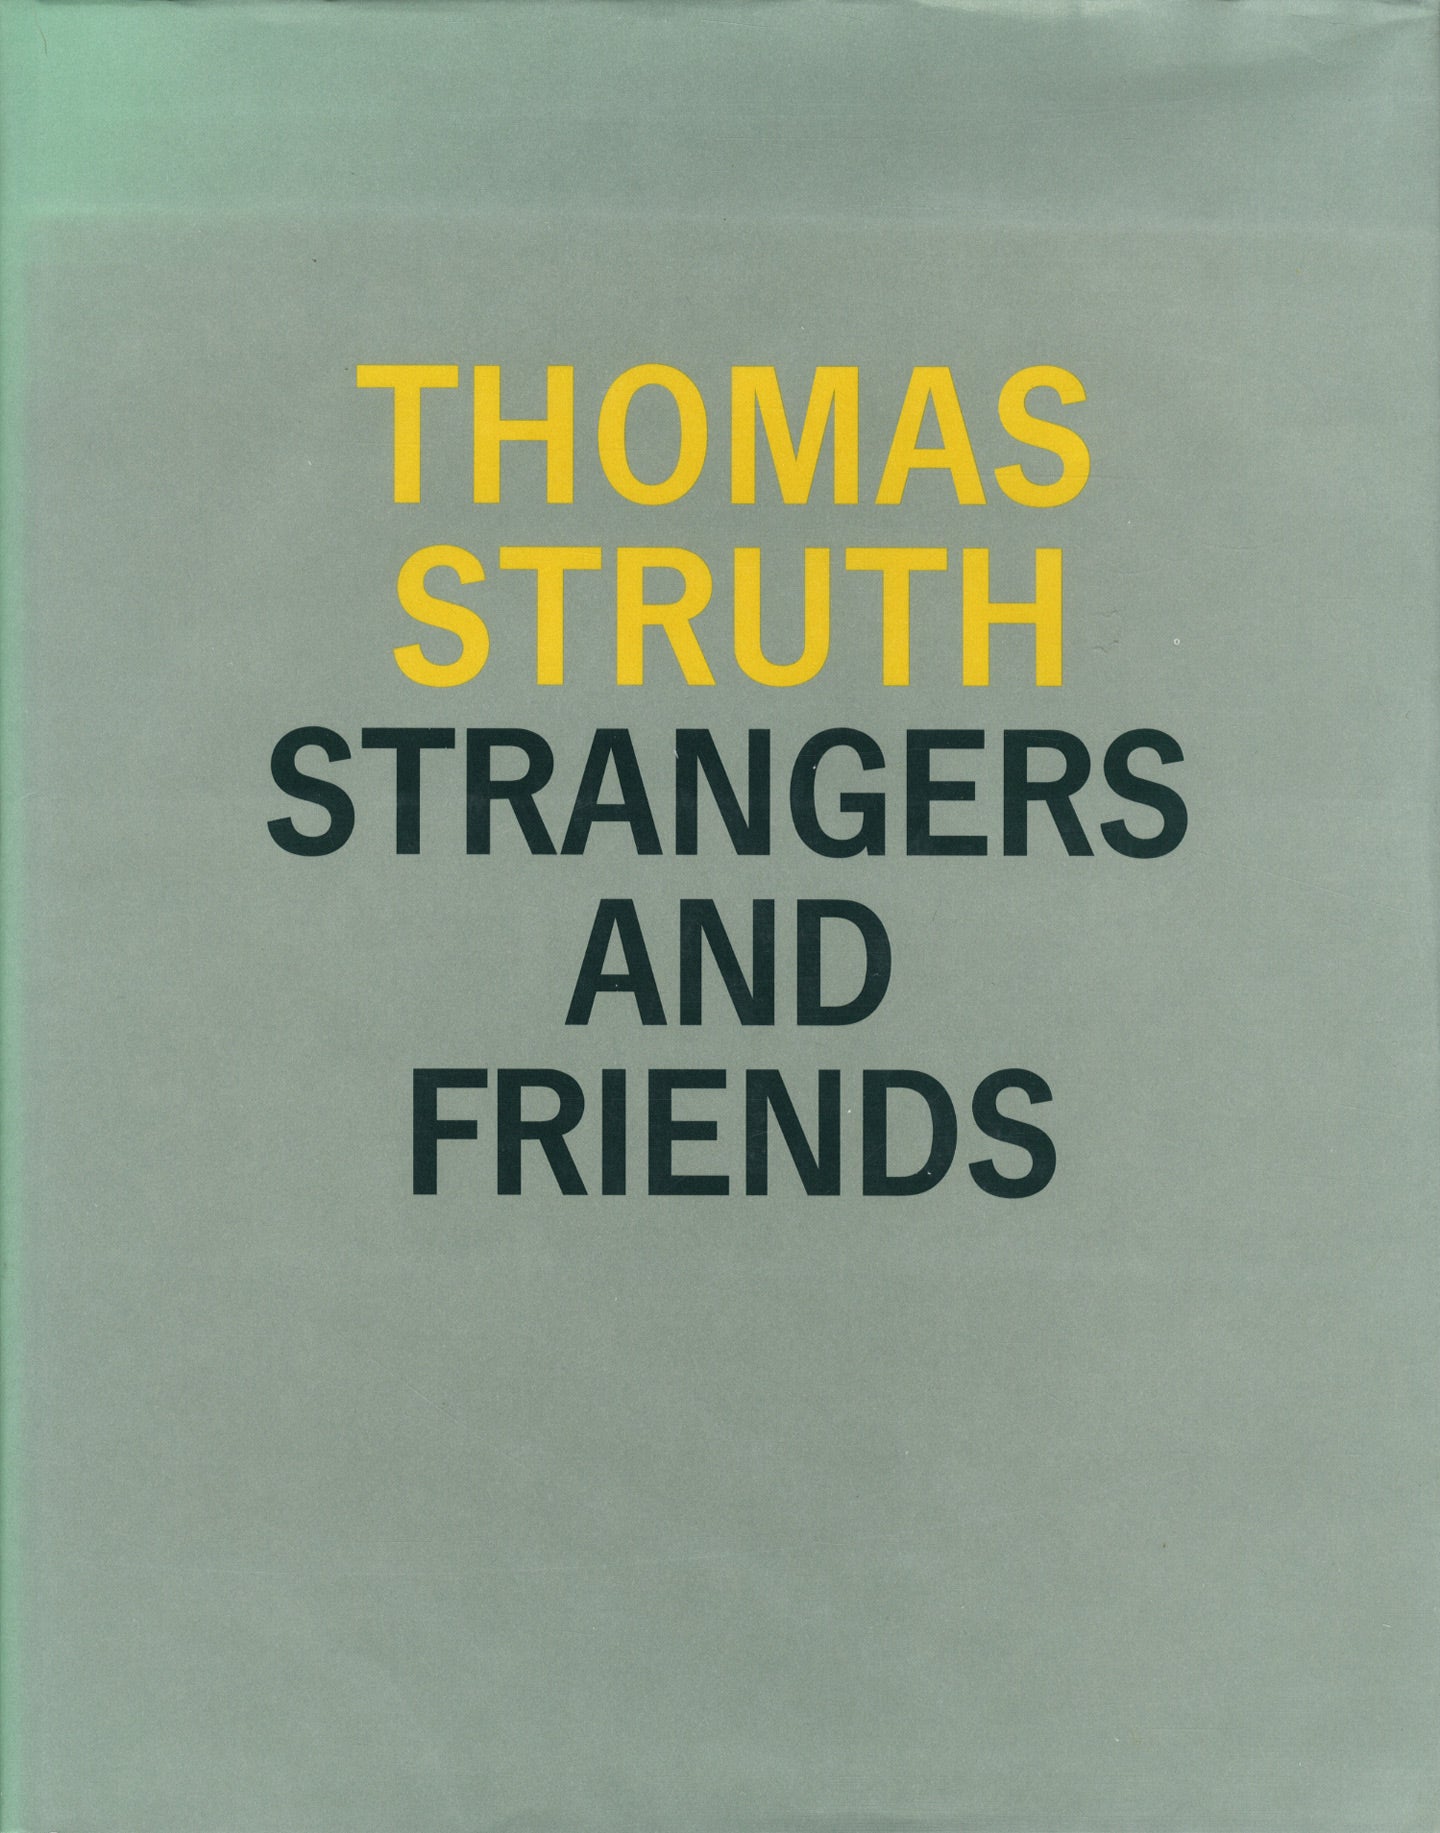 Thomas Struth: Strangers and Friends: Photographs 1986-1992 (Hardcover Edition)